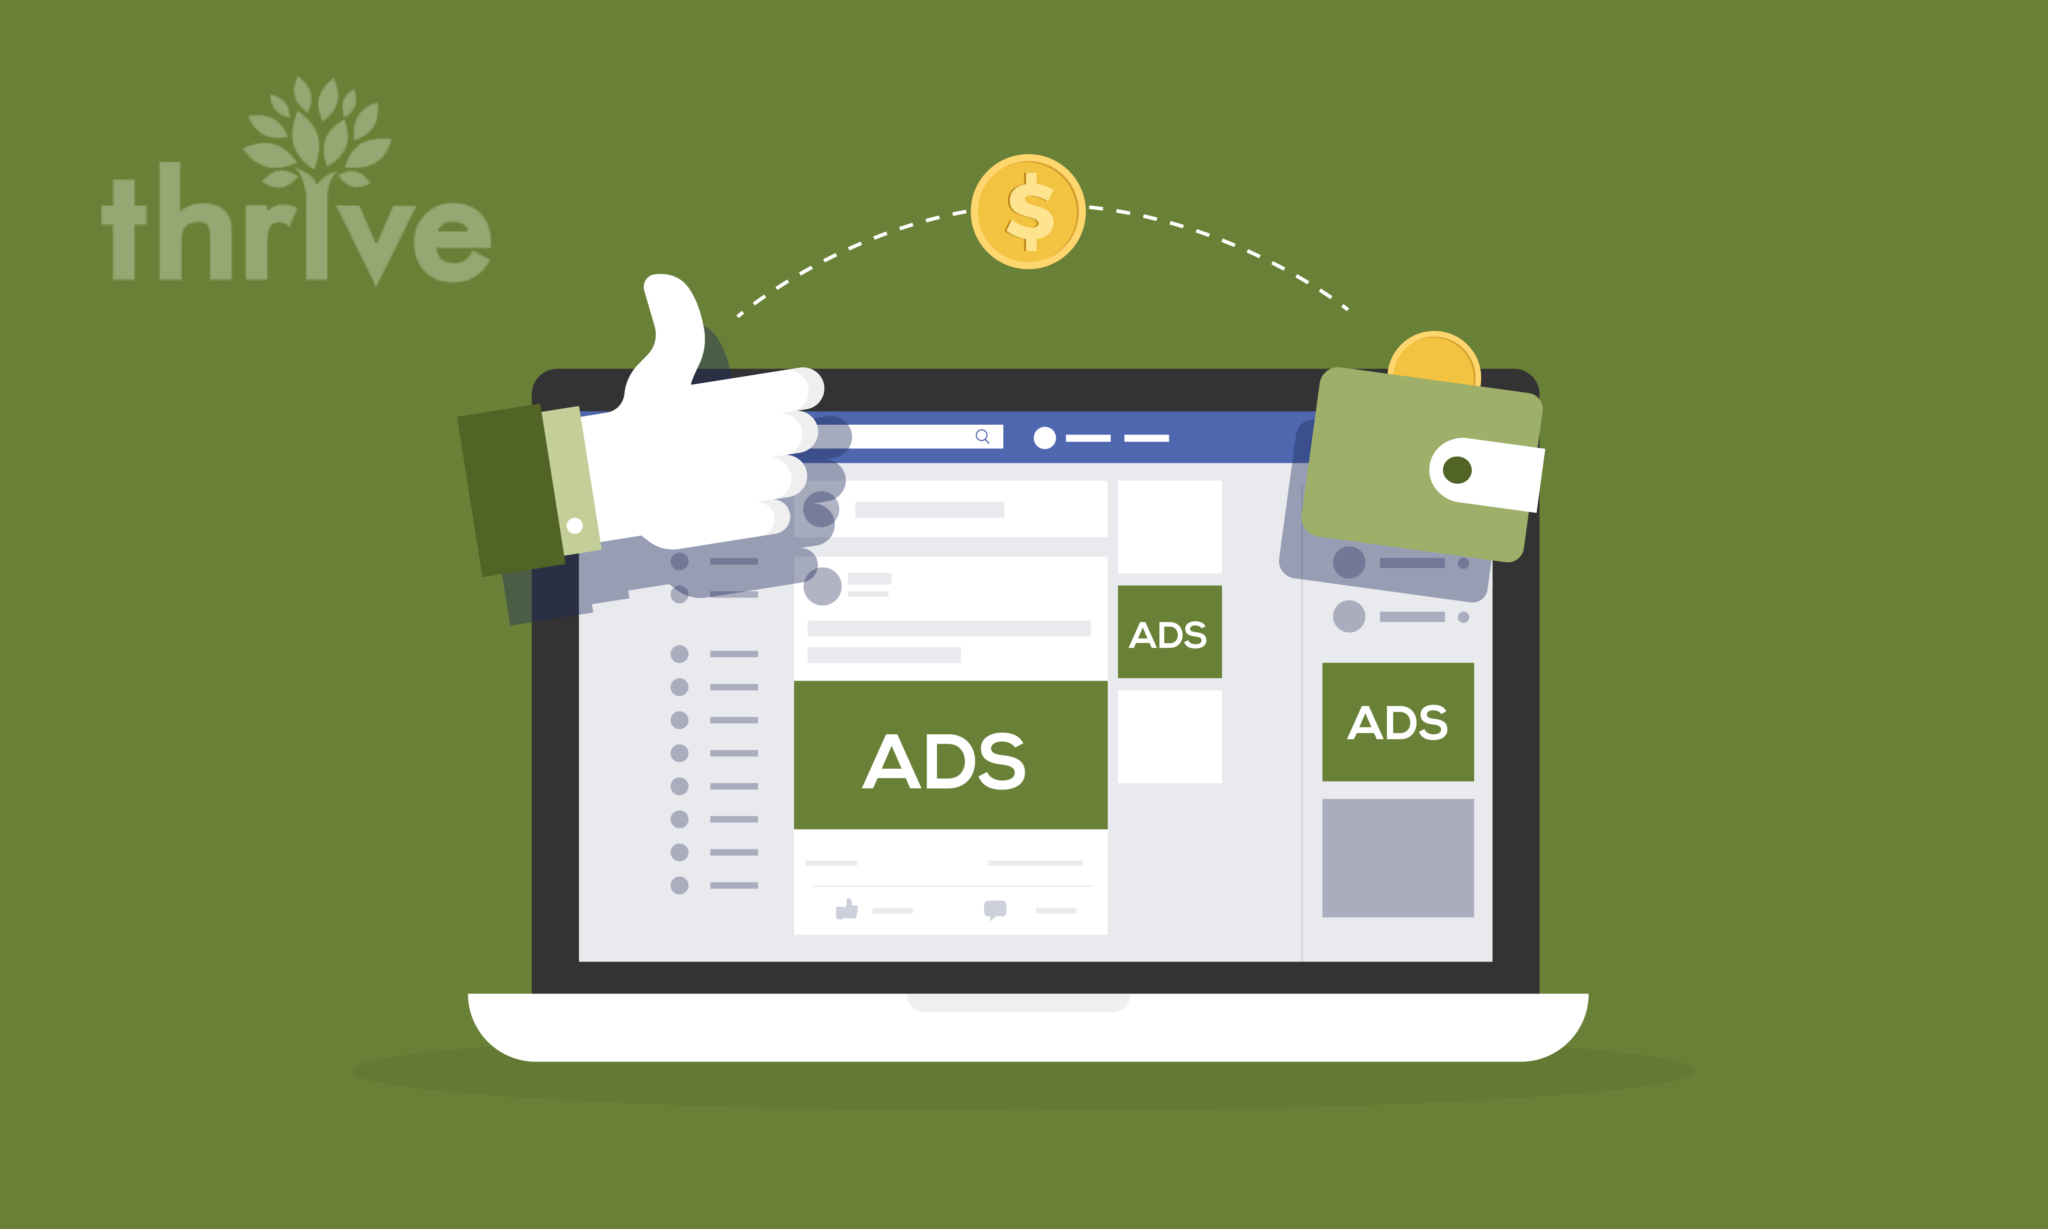 How to Optimize Facebook Ads to Skyrocket Your Conversions